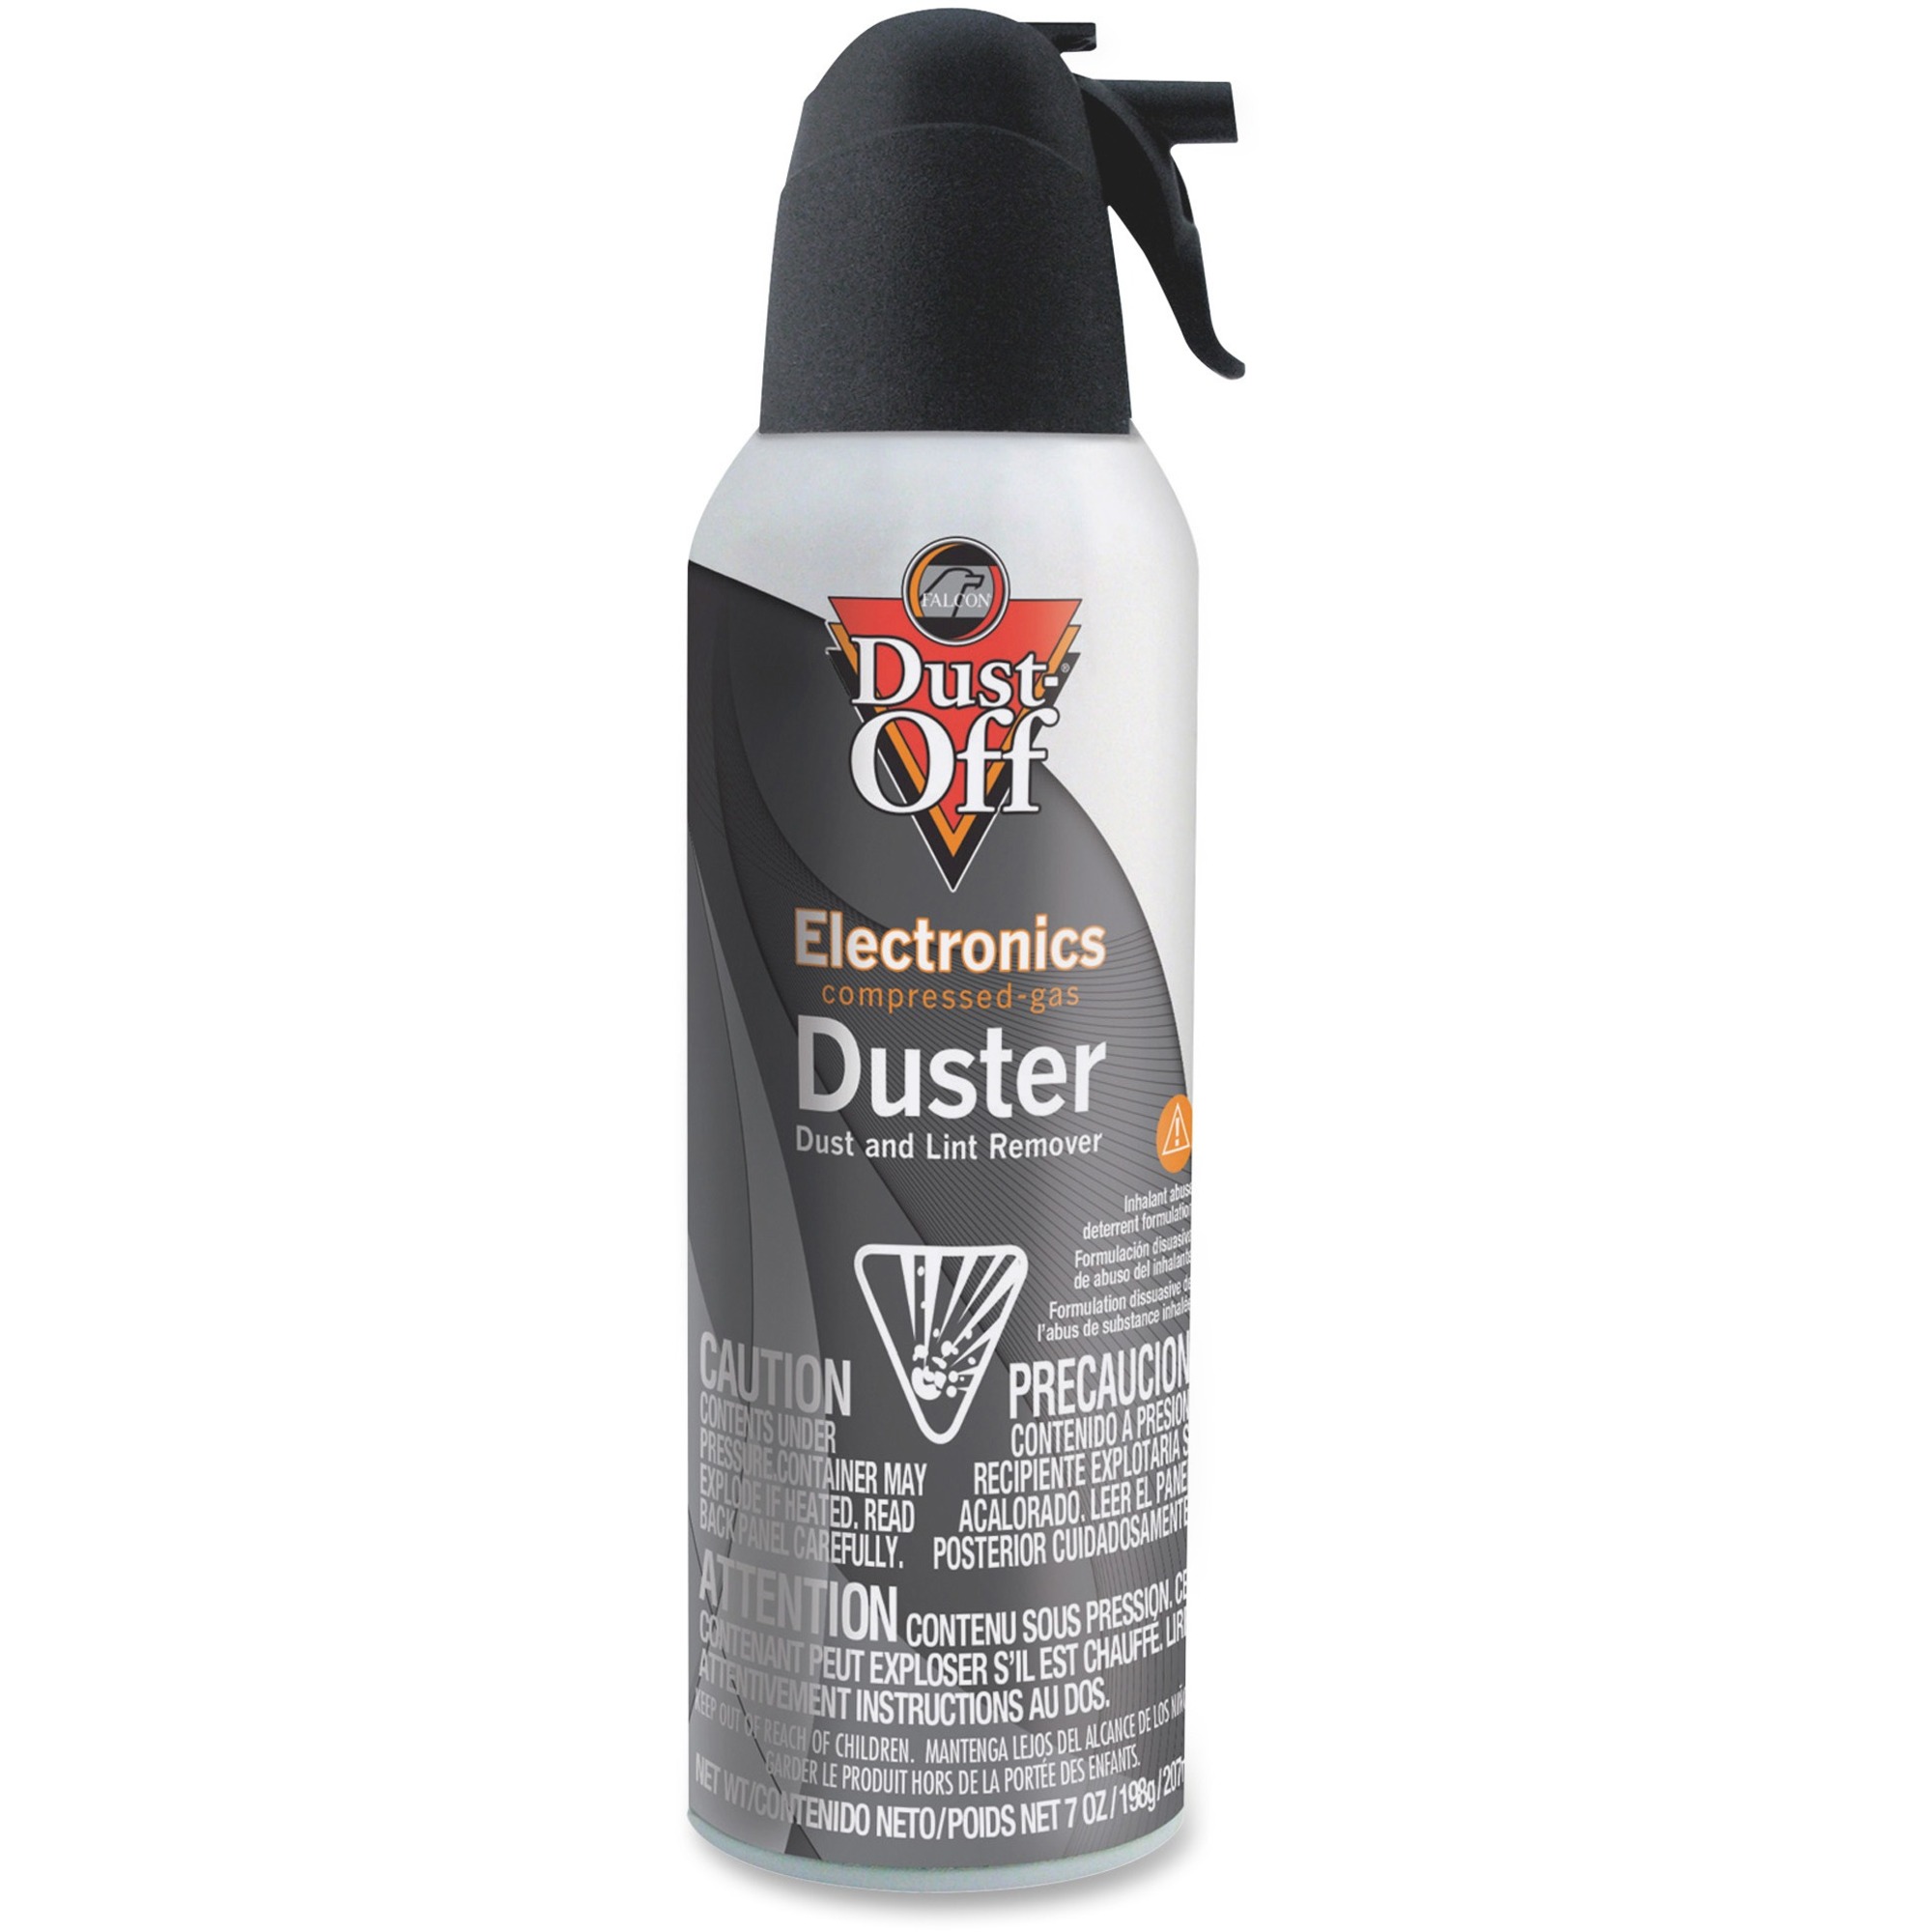 Falcon Dust-Off Compressed Gas Electronics Duster